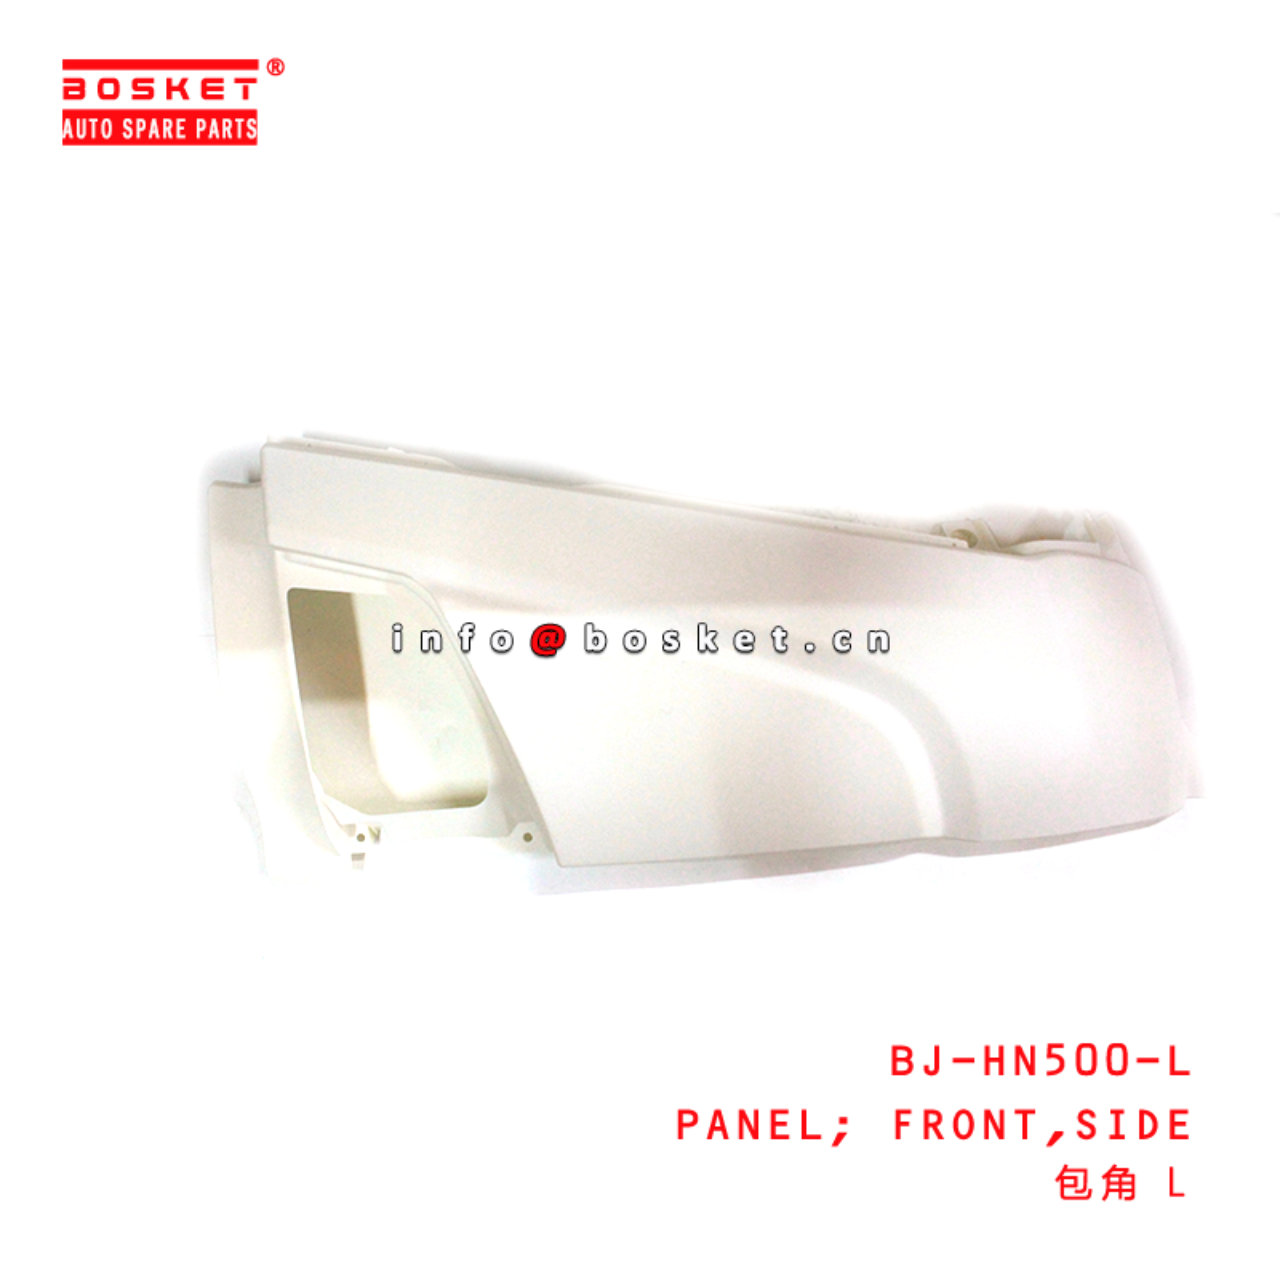 BJ-HN500-L Side Front Panel Suitable for ISUZU HINO 500